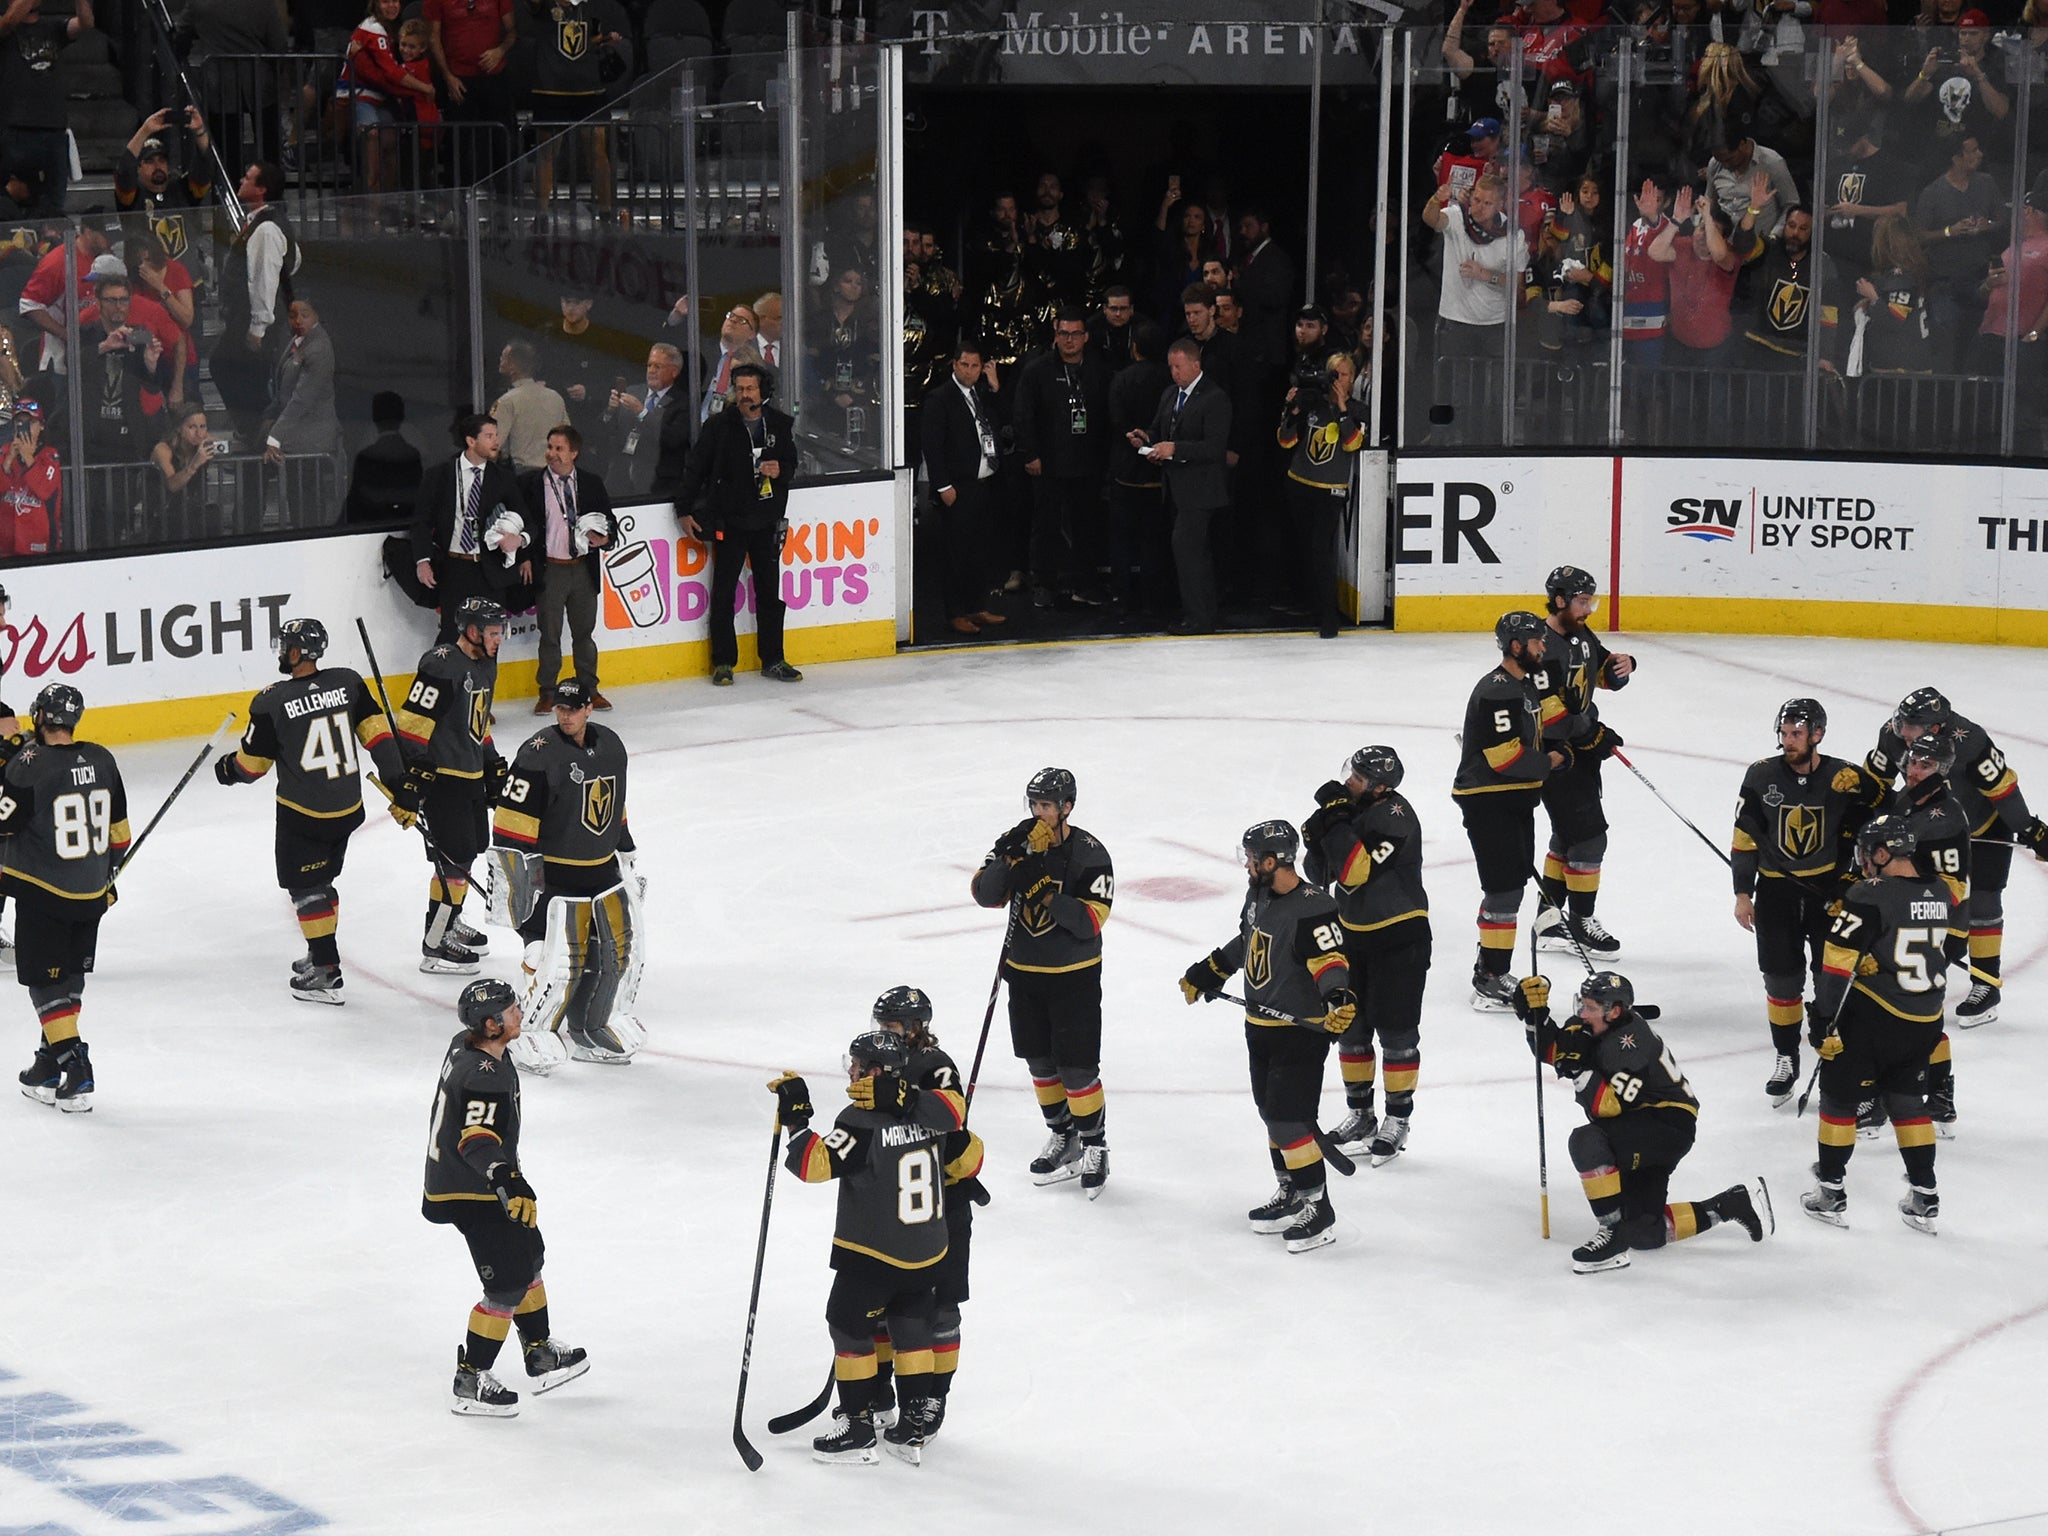 Reaching the championship series was a phenomenal achievement for the Golden Knights